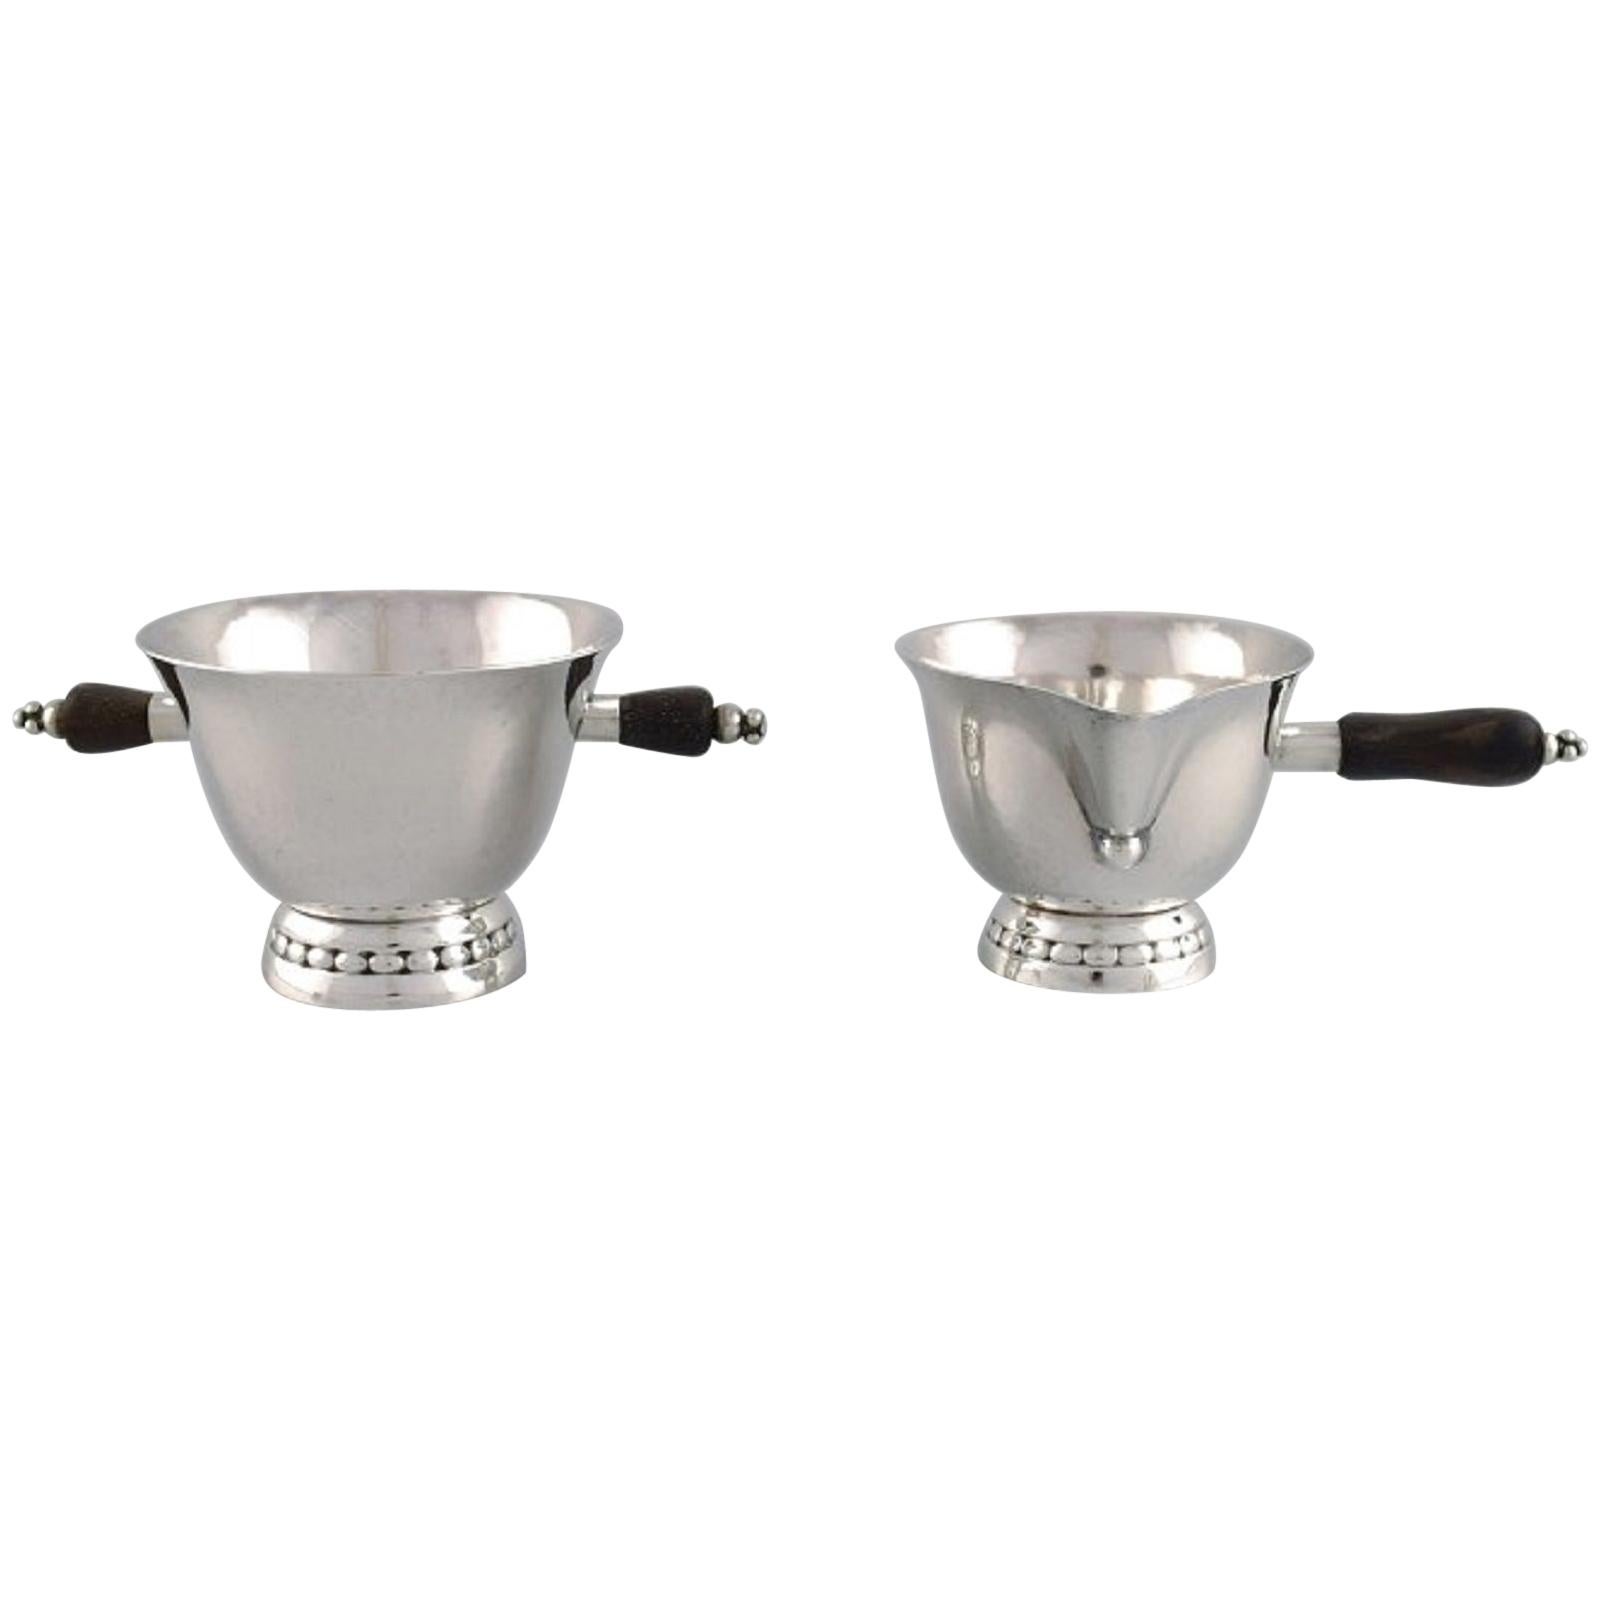 Early Georg Jensen Sugar or Cream Set in Sterling Silver with Handles in Ebony For Sale